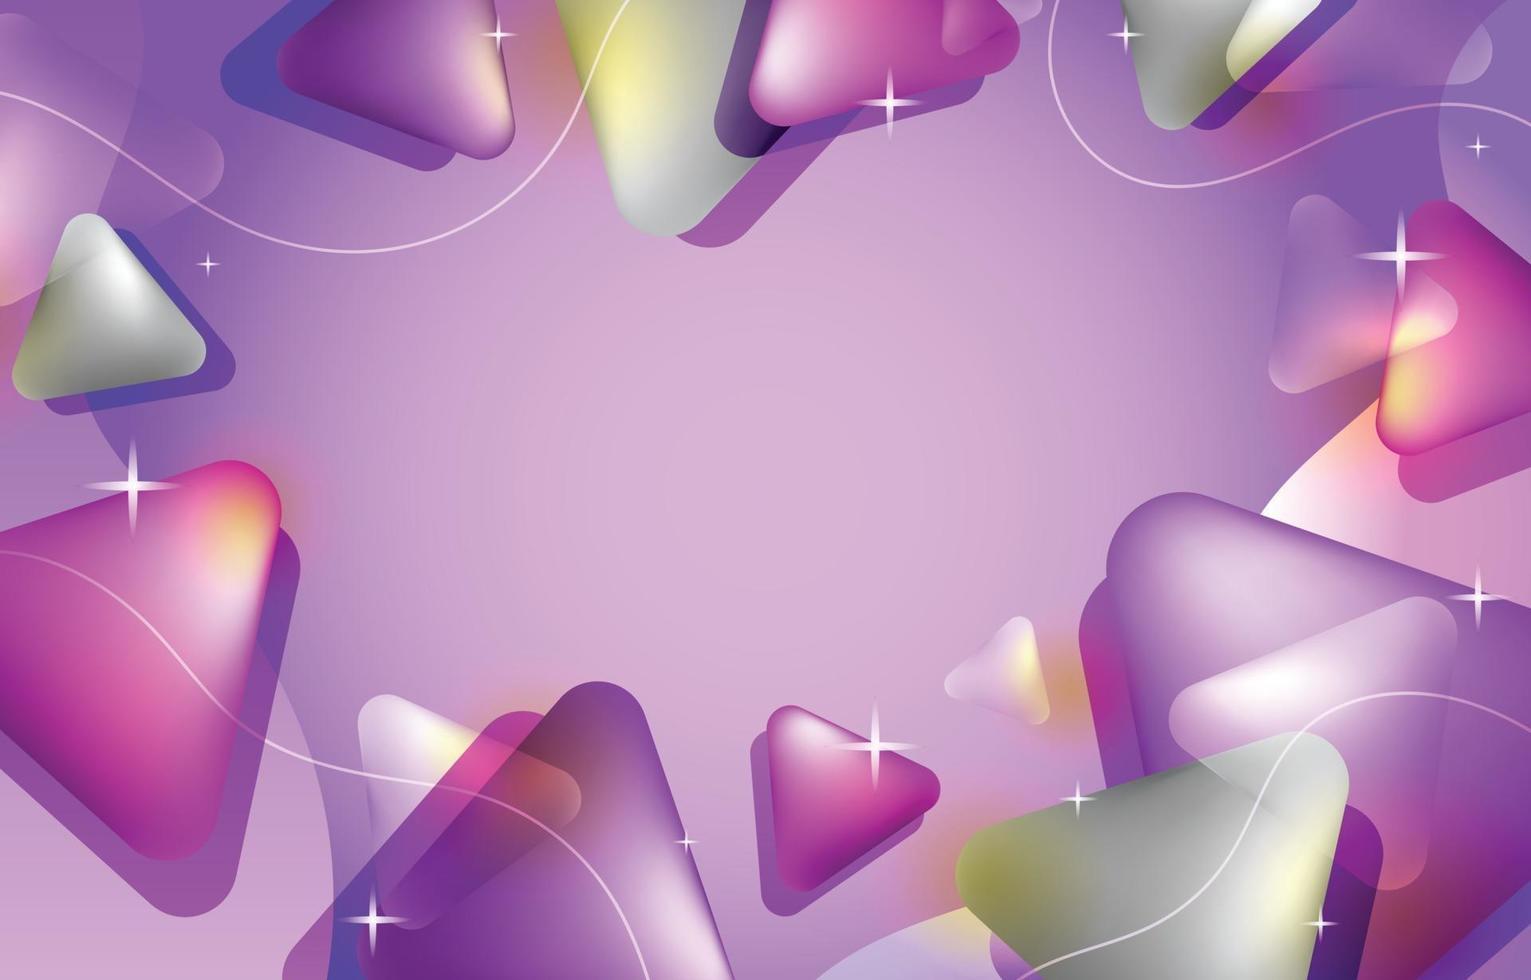 Lilac Abstract Background Template vector